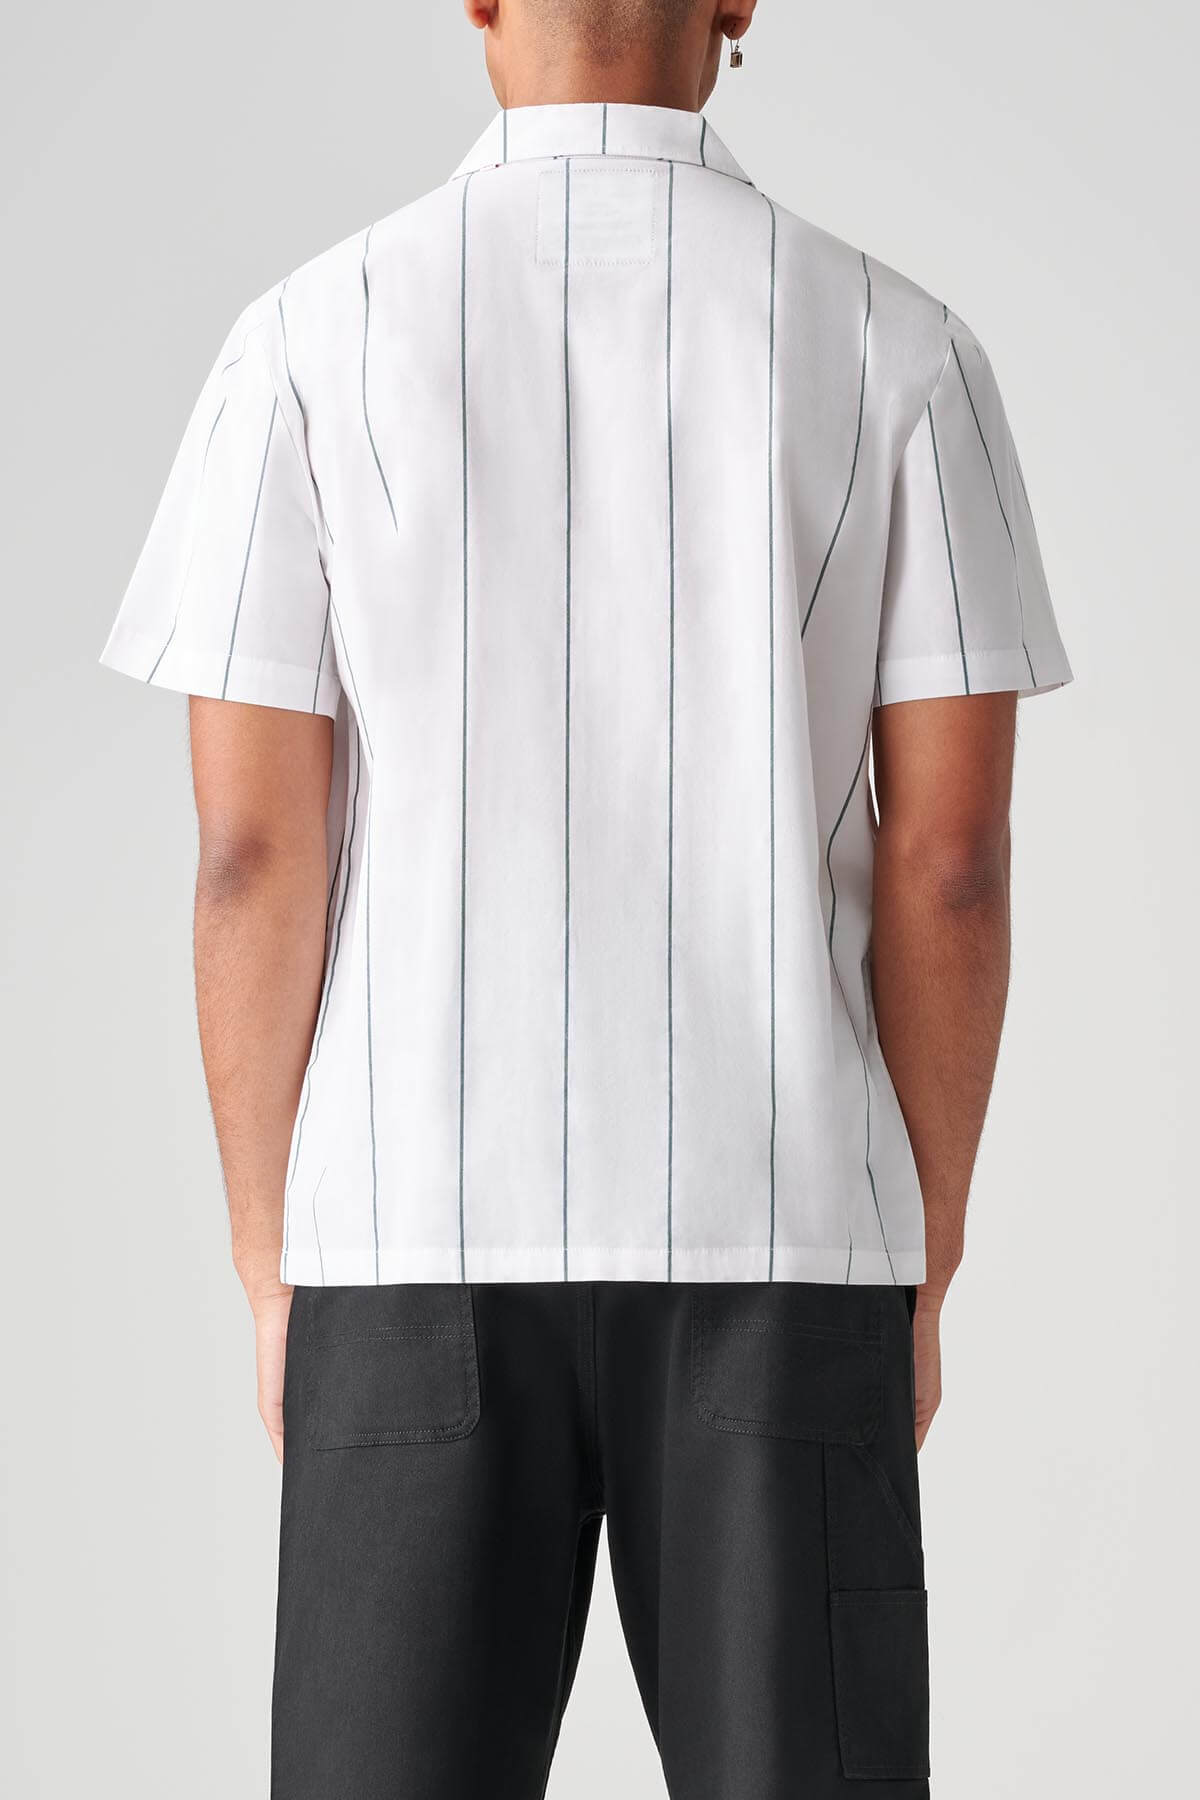 Globe WOVEN SHIRTS Off Course SS Shirt - White in White